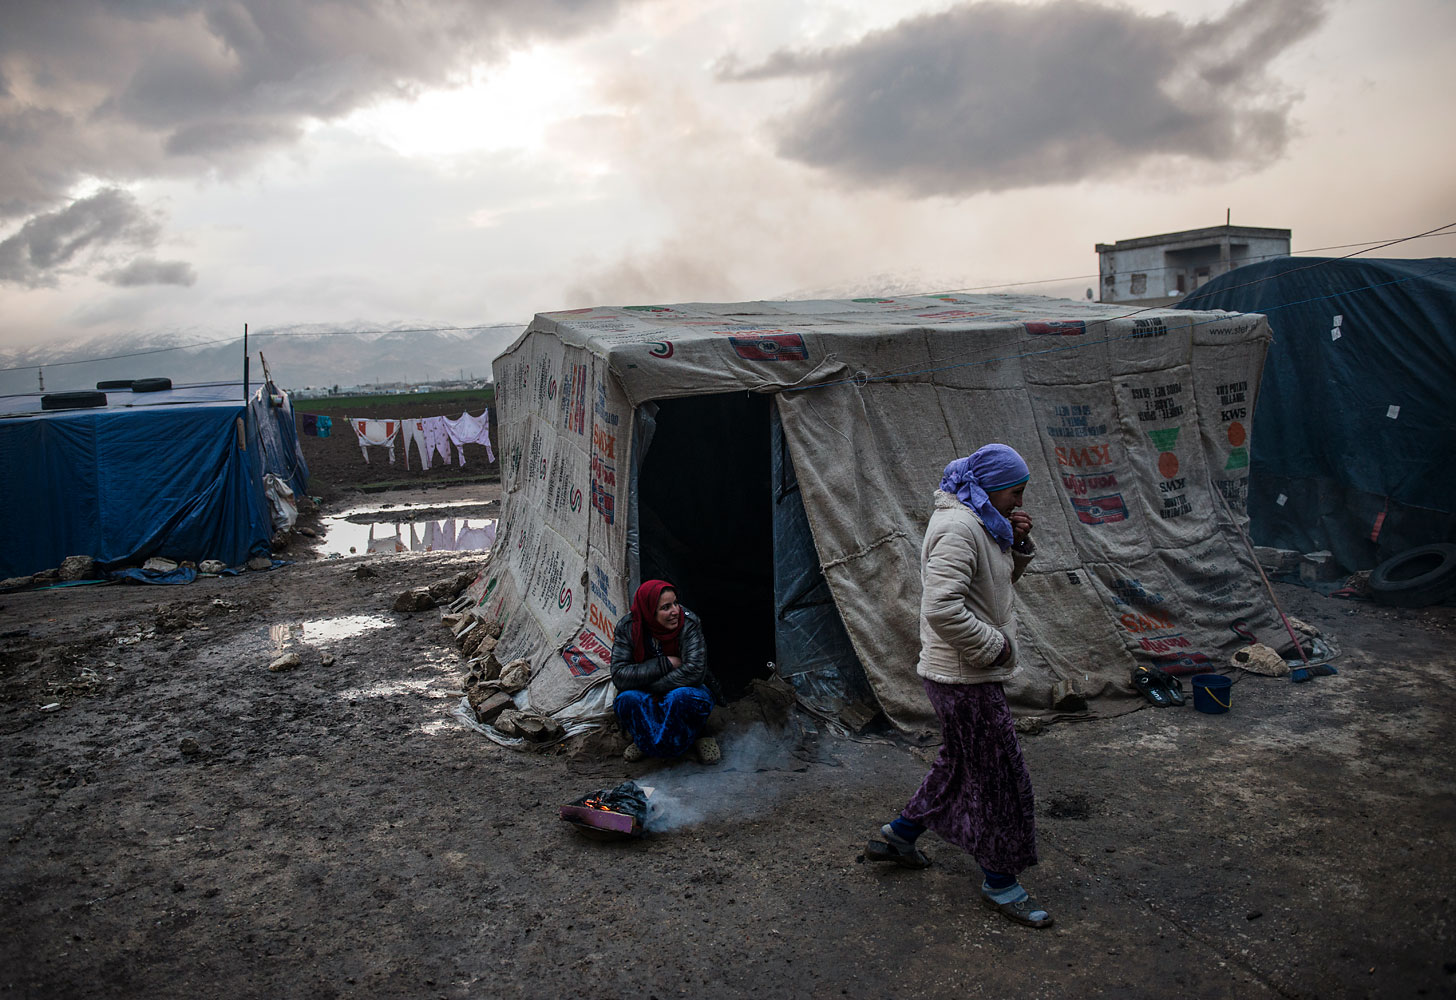 Seventy families live by the shell of an abandoned onion-processing factory, trudging through the mud in flip-flops. Many had to bail water from their tents after a rainstorm. They pay between US$50 and US$200 a month to live here in Faida, Bekaa Valley.